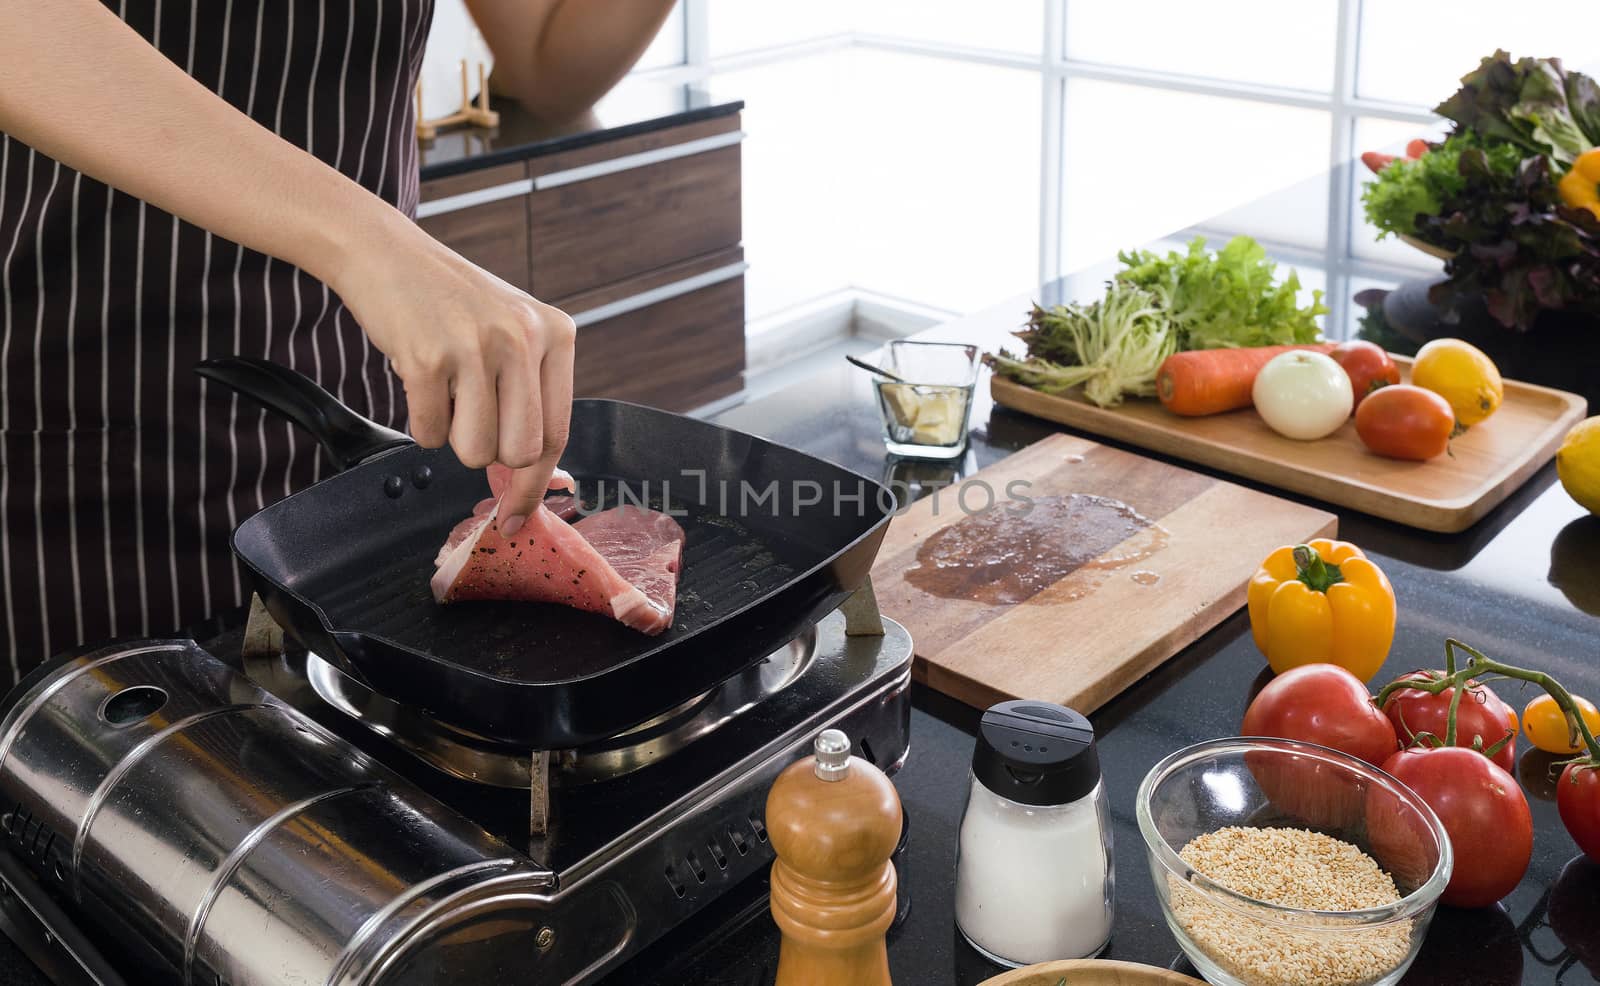 Housewives are frying steaks in the modern kitchen.